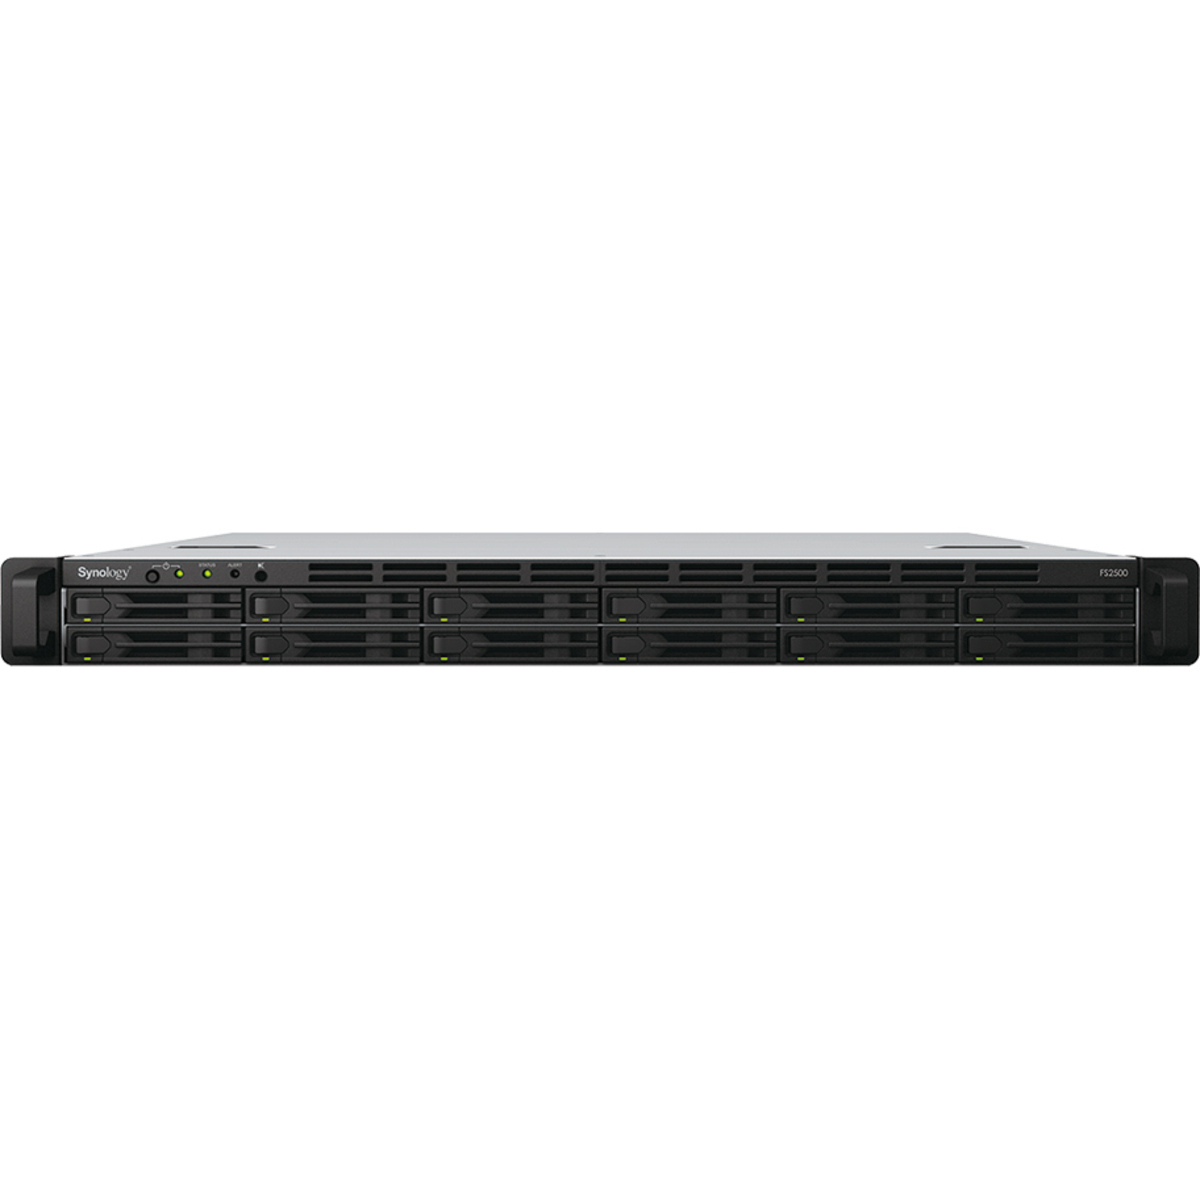 Synology FlashStation FS2500 30.7tb 12-Bay RackMount Large Business / Enterprise NAS - Network Attached Storage Device 8x3.8tb Synology SAT5210 Series SAT5210-3840G 2.5 530/500MB/s SATA 6Gb/s SSD ENTERPRISE Class Drives Installed - Burn-In Tested - FREE RAM UPGRADE FlashStation FS2500